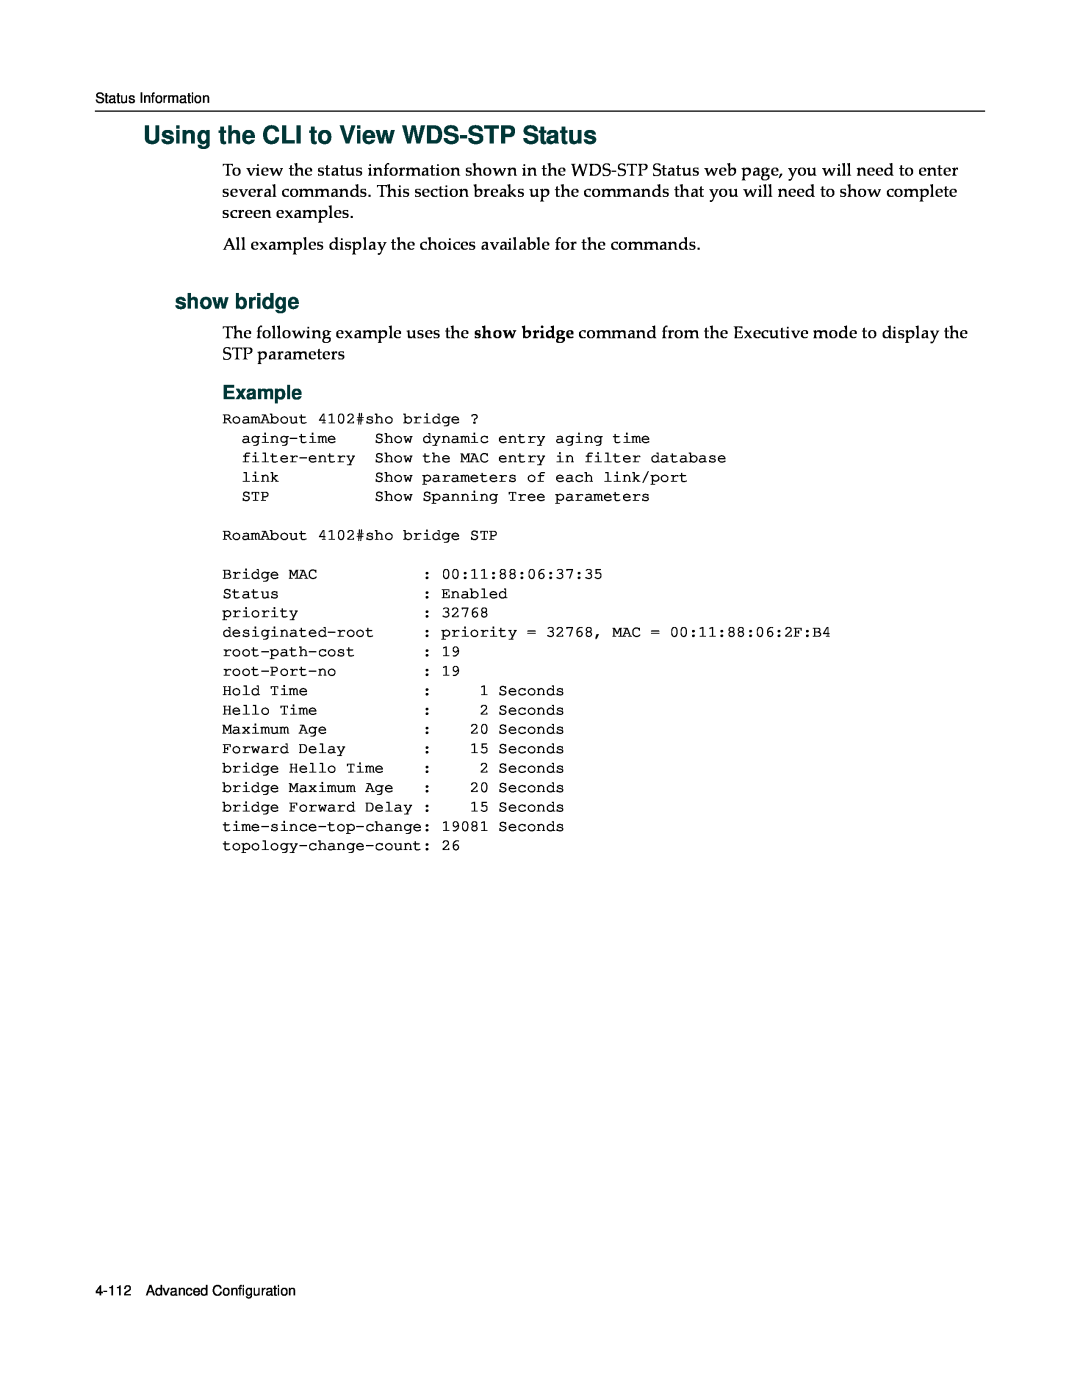 Enterasys Networks RBT-4102 manual Using the CLI to View WDS-STP Status, show bridge, Example 